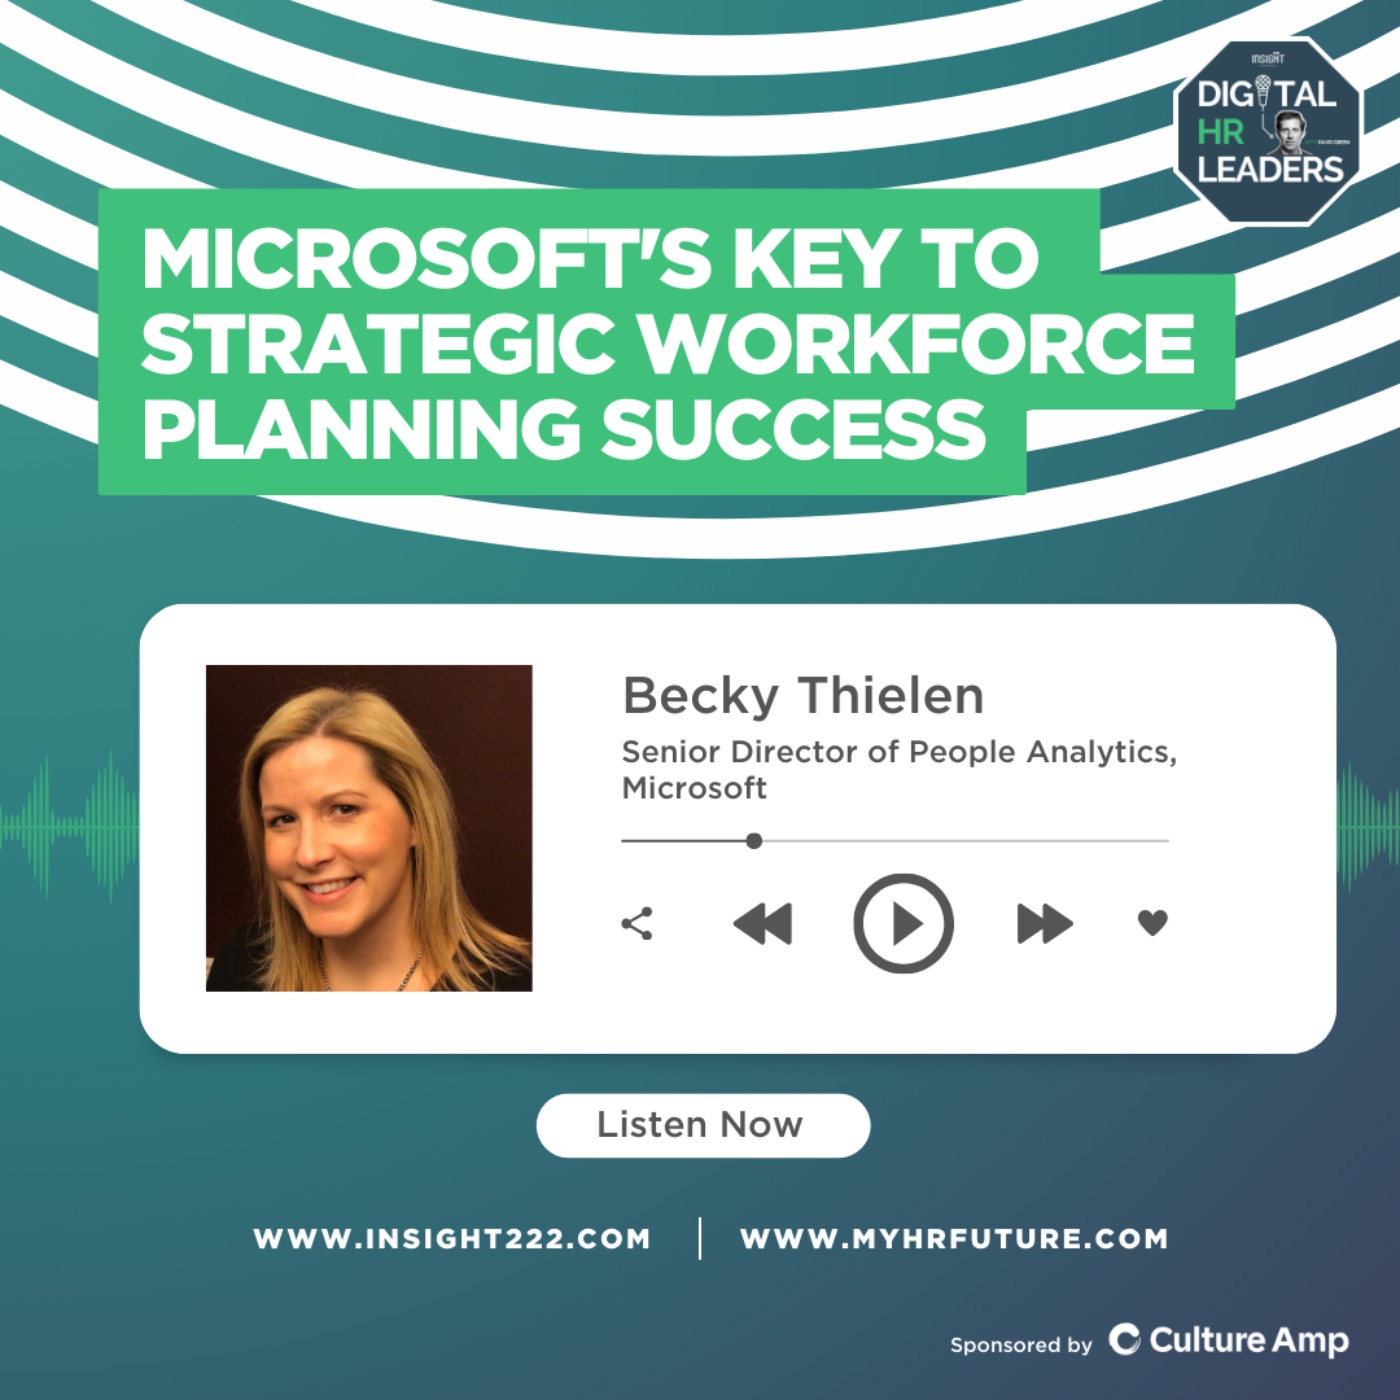 Microsoft’s Key to Strategic Workforce Planning Success (an Interview with Becky Thielen)